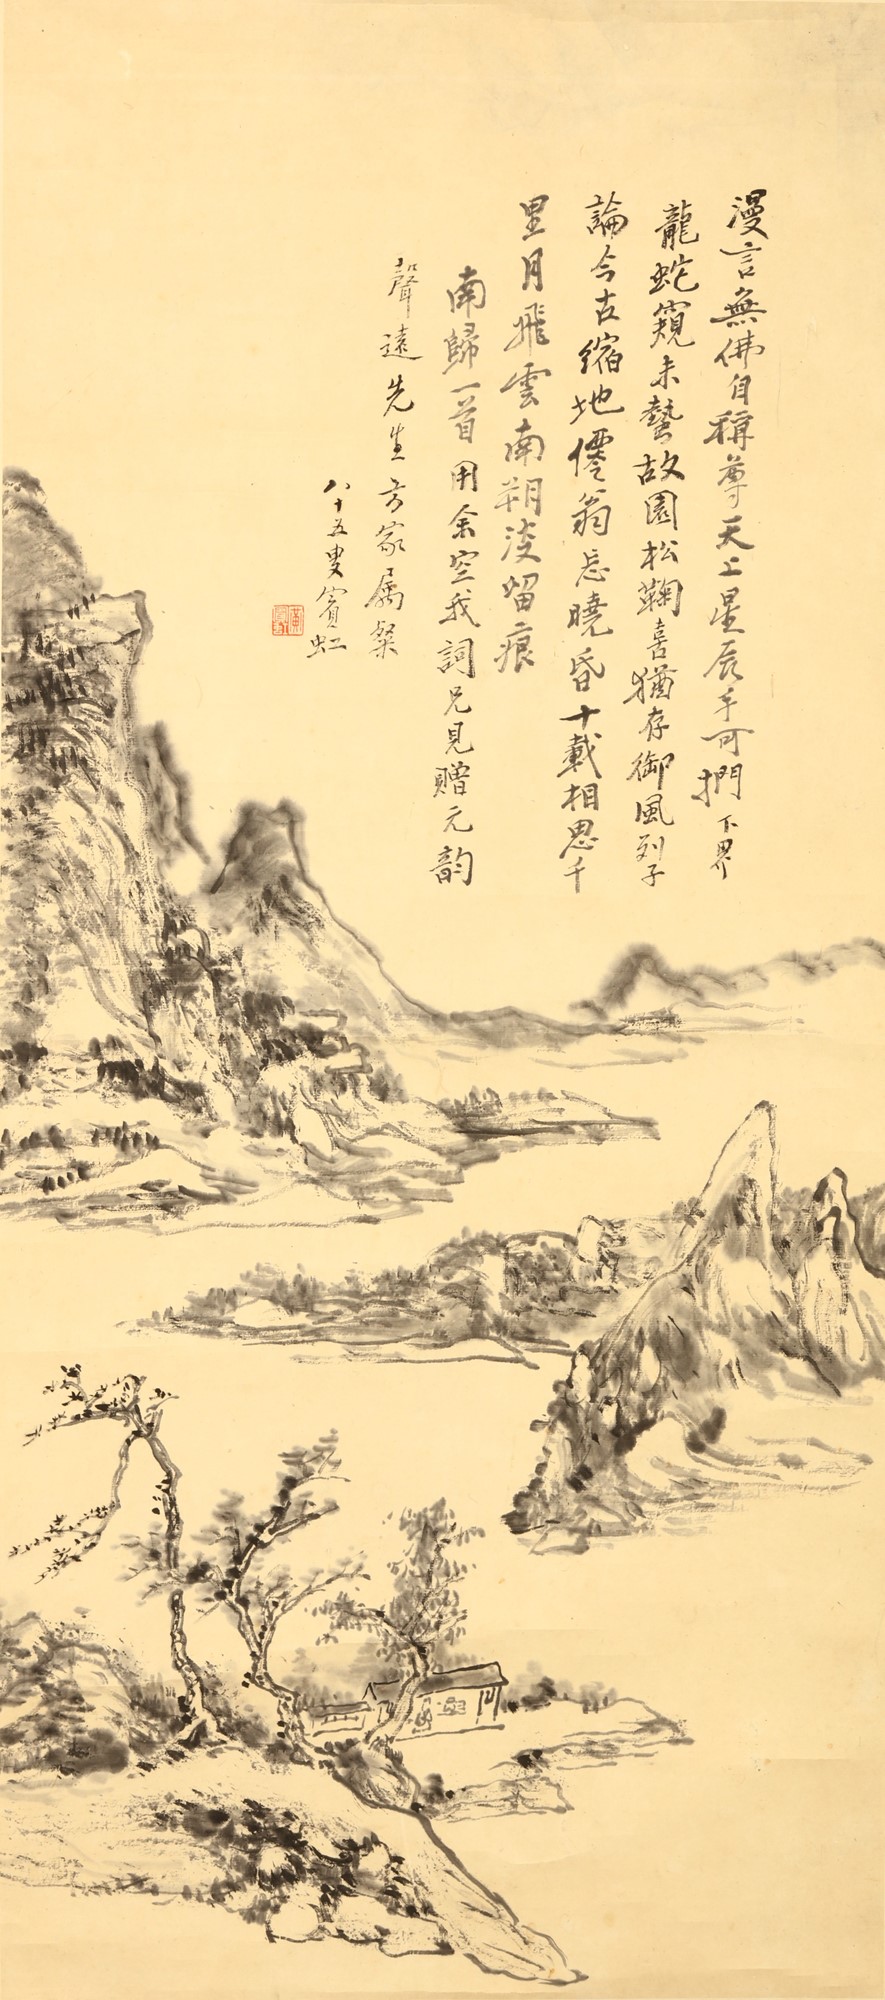 Huang Binhong (attrib., 1864 - 1955) ink and colour on paper, two hanging scrolls